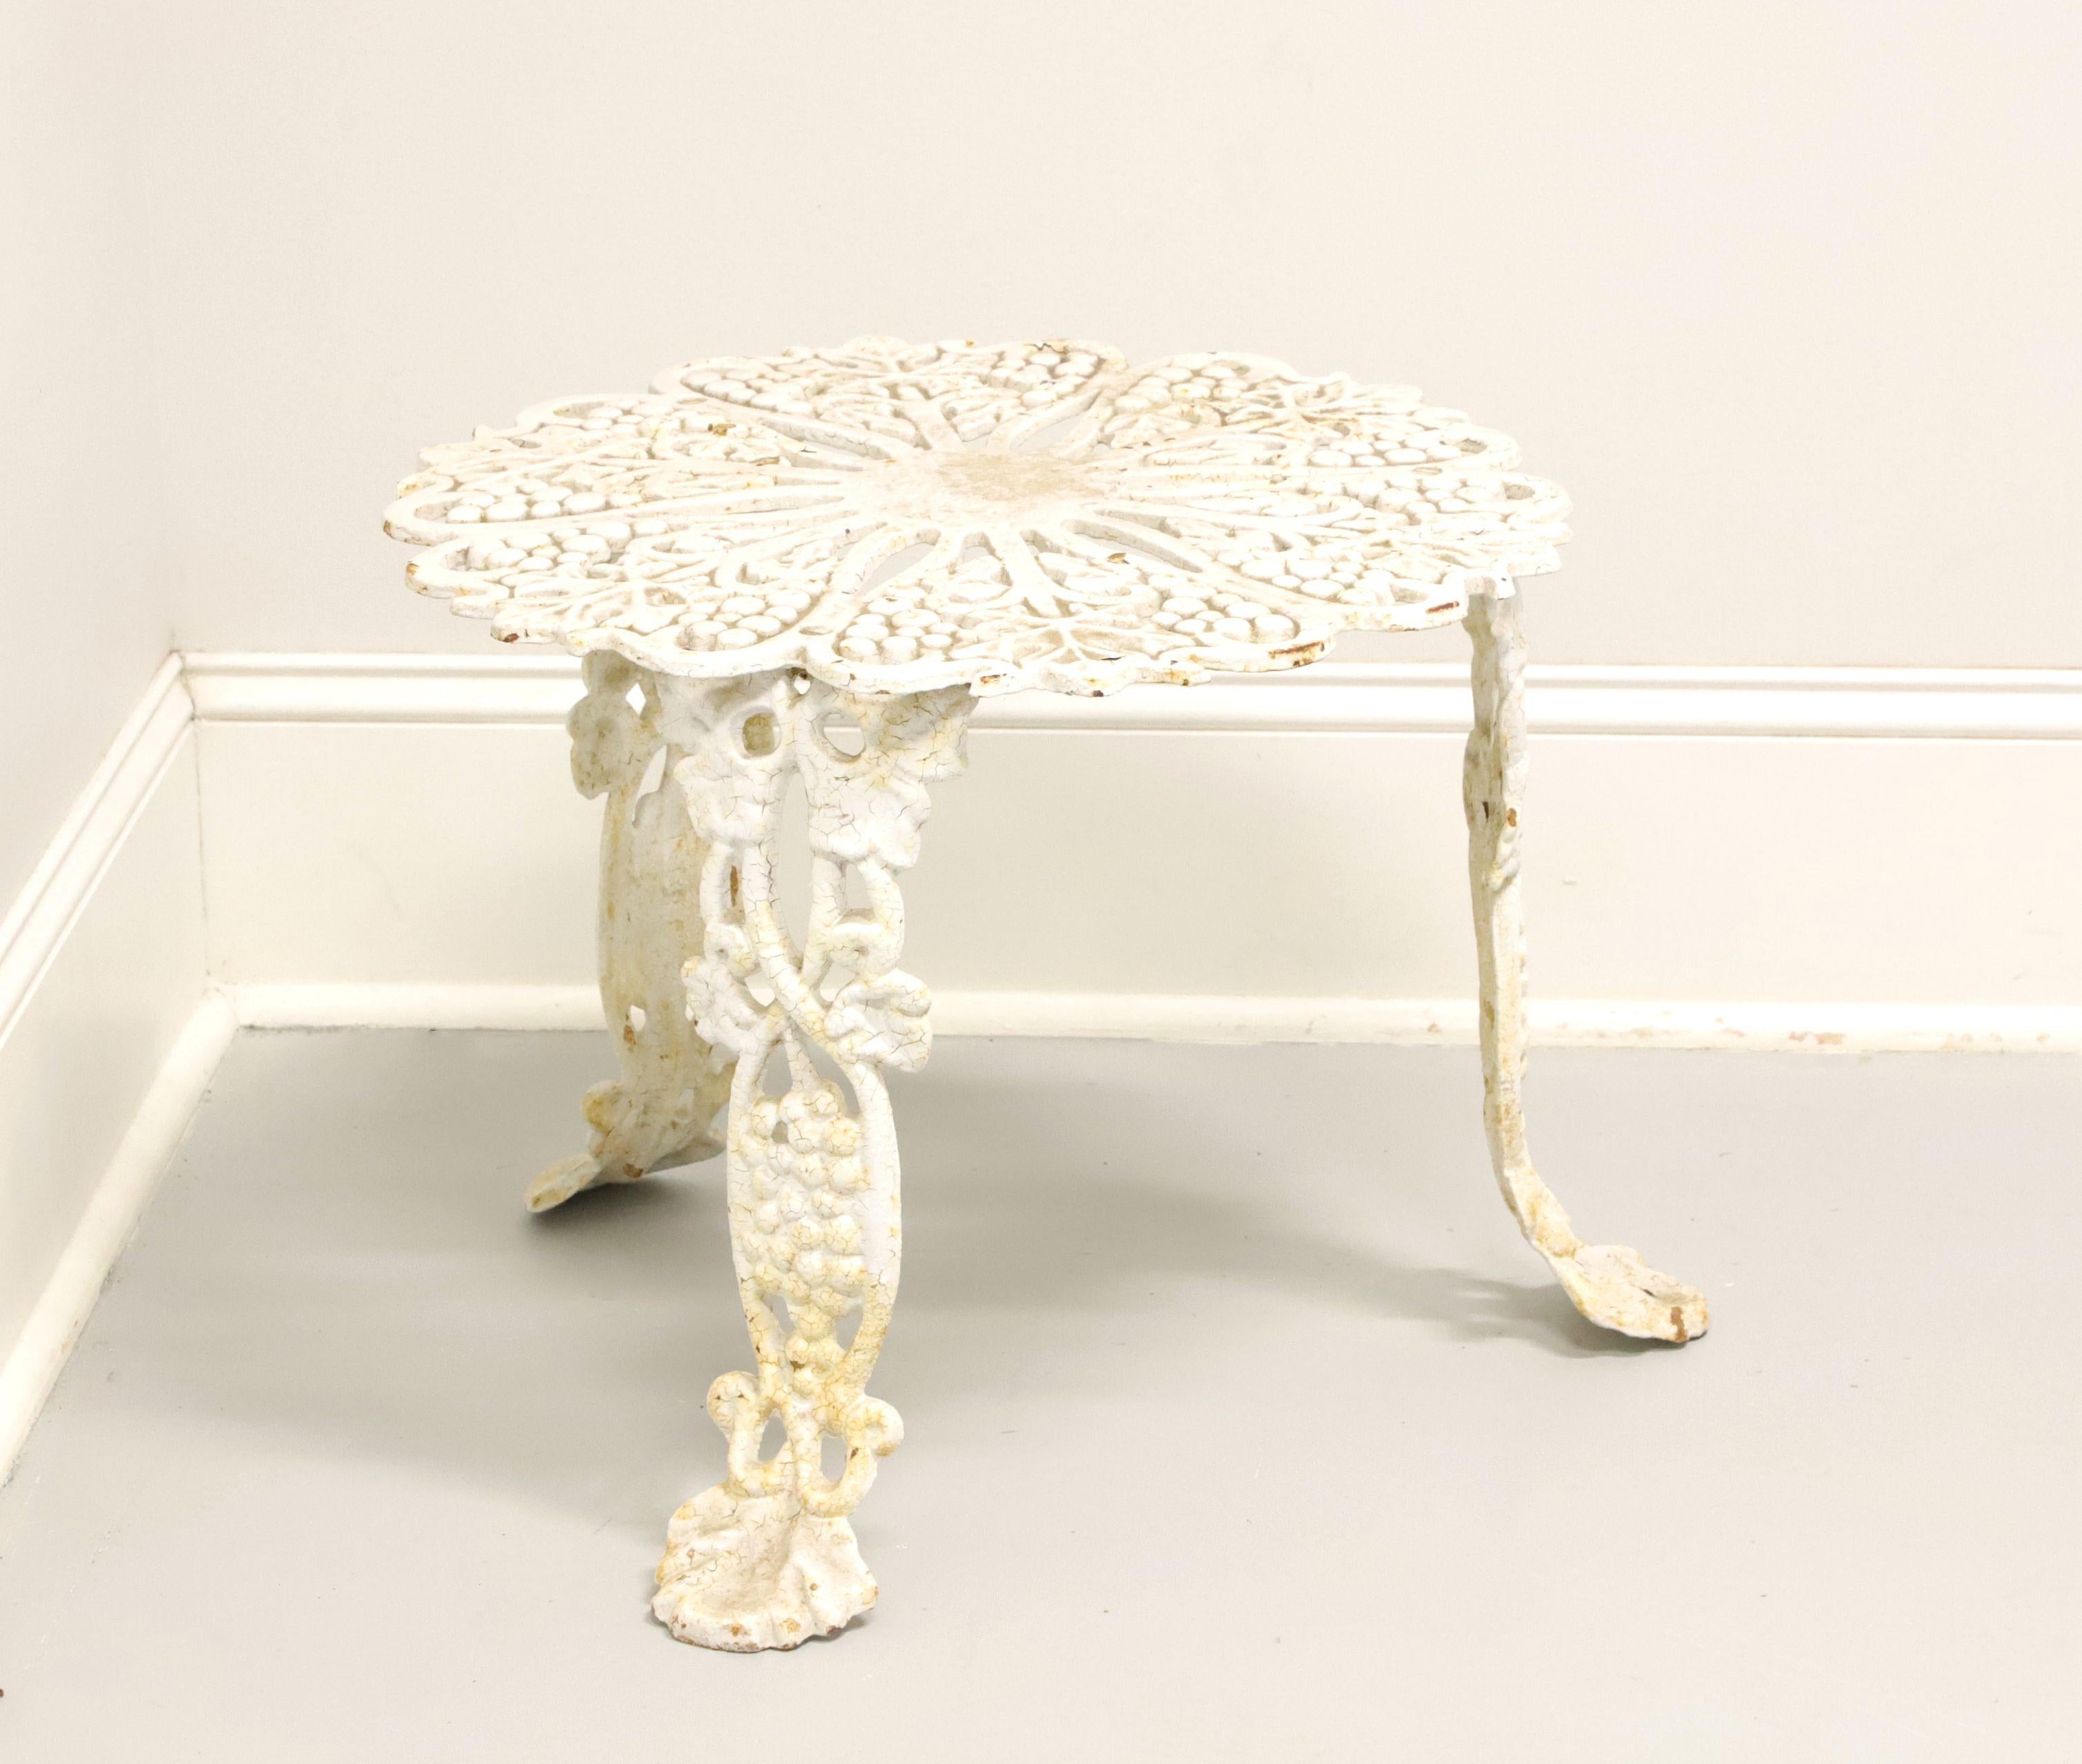 An antique Victorian style grape leaf motif round garden patio side table, unbranded. Cast iron construction in a pierced Rococo design, scalloped edge top, and three legs. Ready for a fresh coat of paint or use as-found. Made in the USA, in the